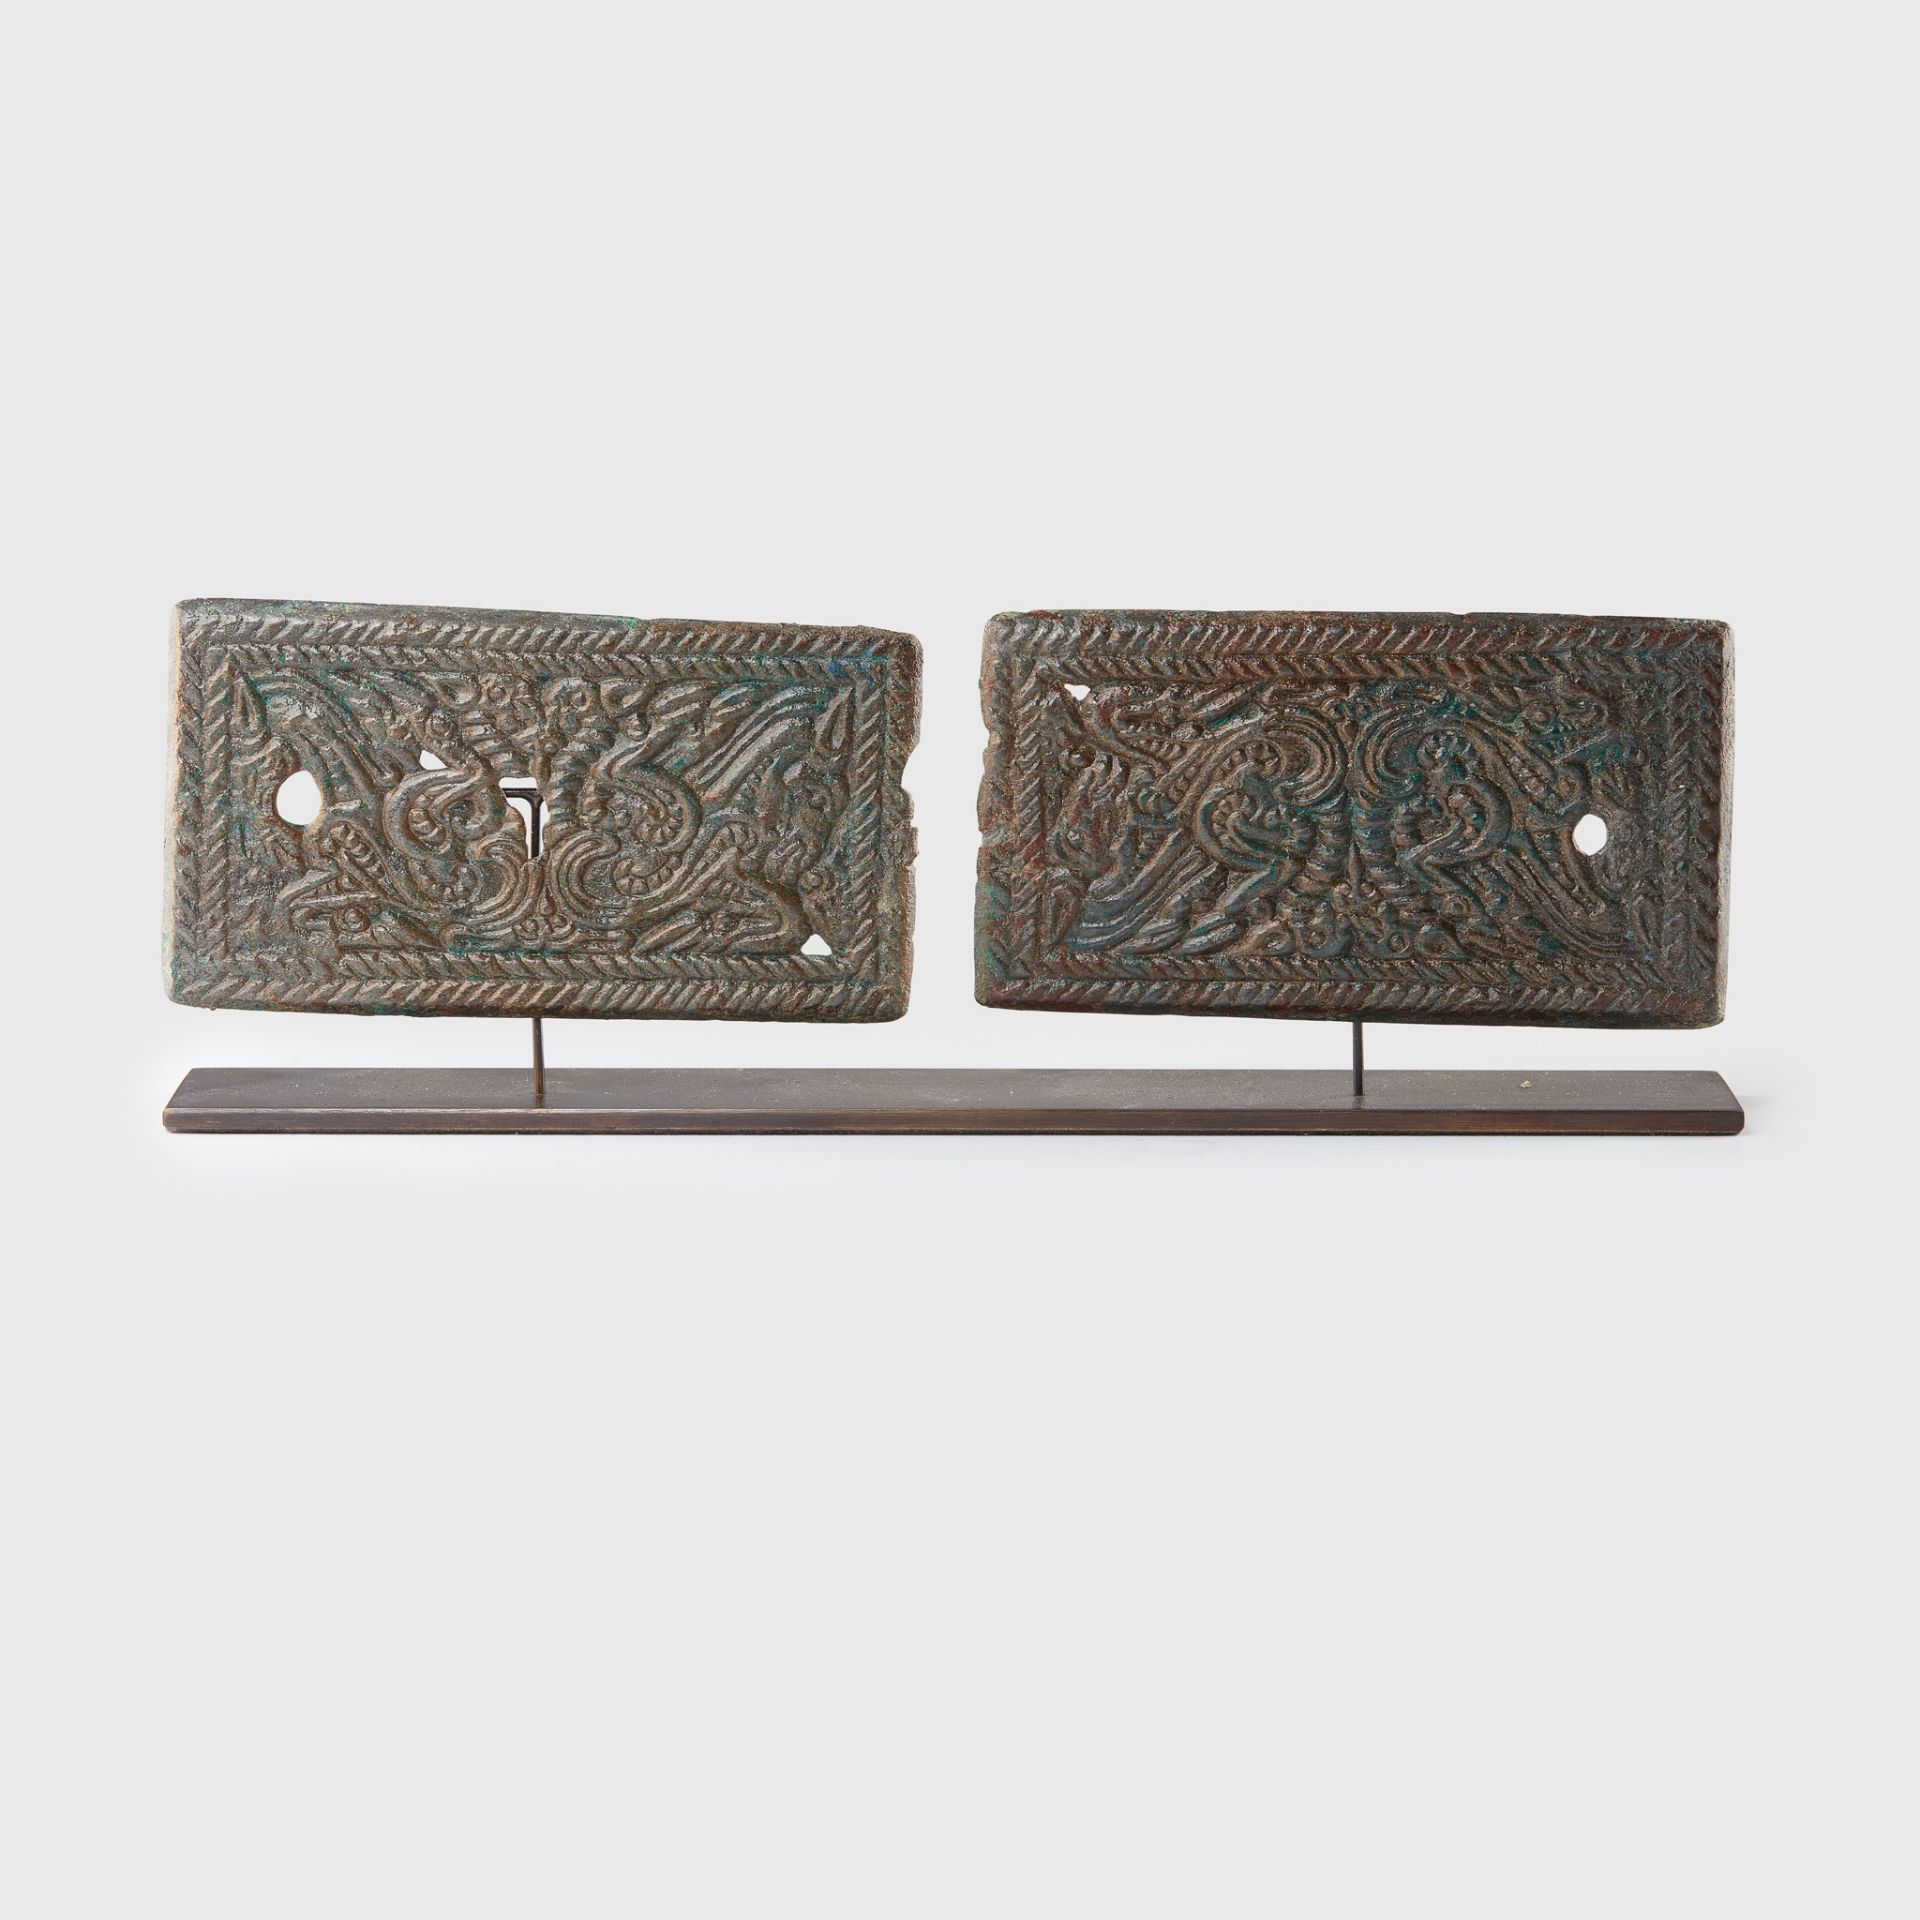 COLLECTION OF ORDOS BRONZE PLAQUES NORTHERN CHINA, 3RD - 2ND CENTURY B.C.